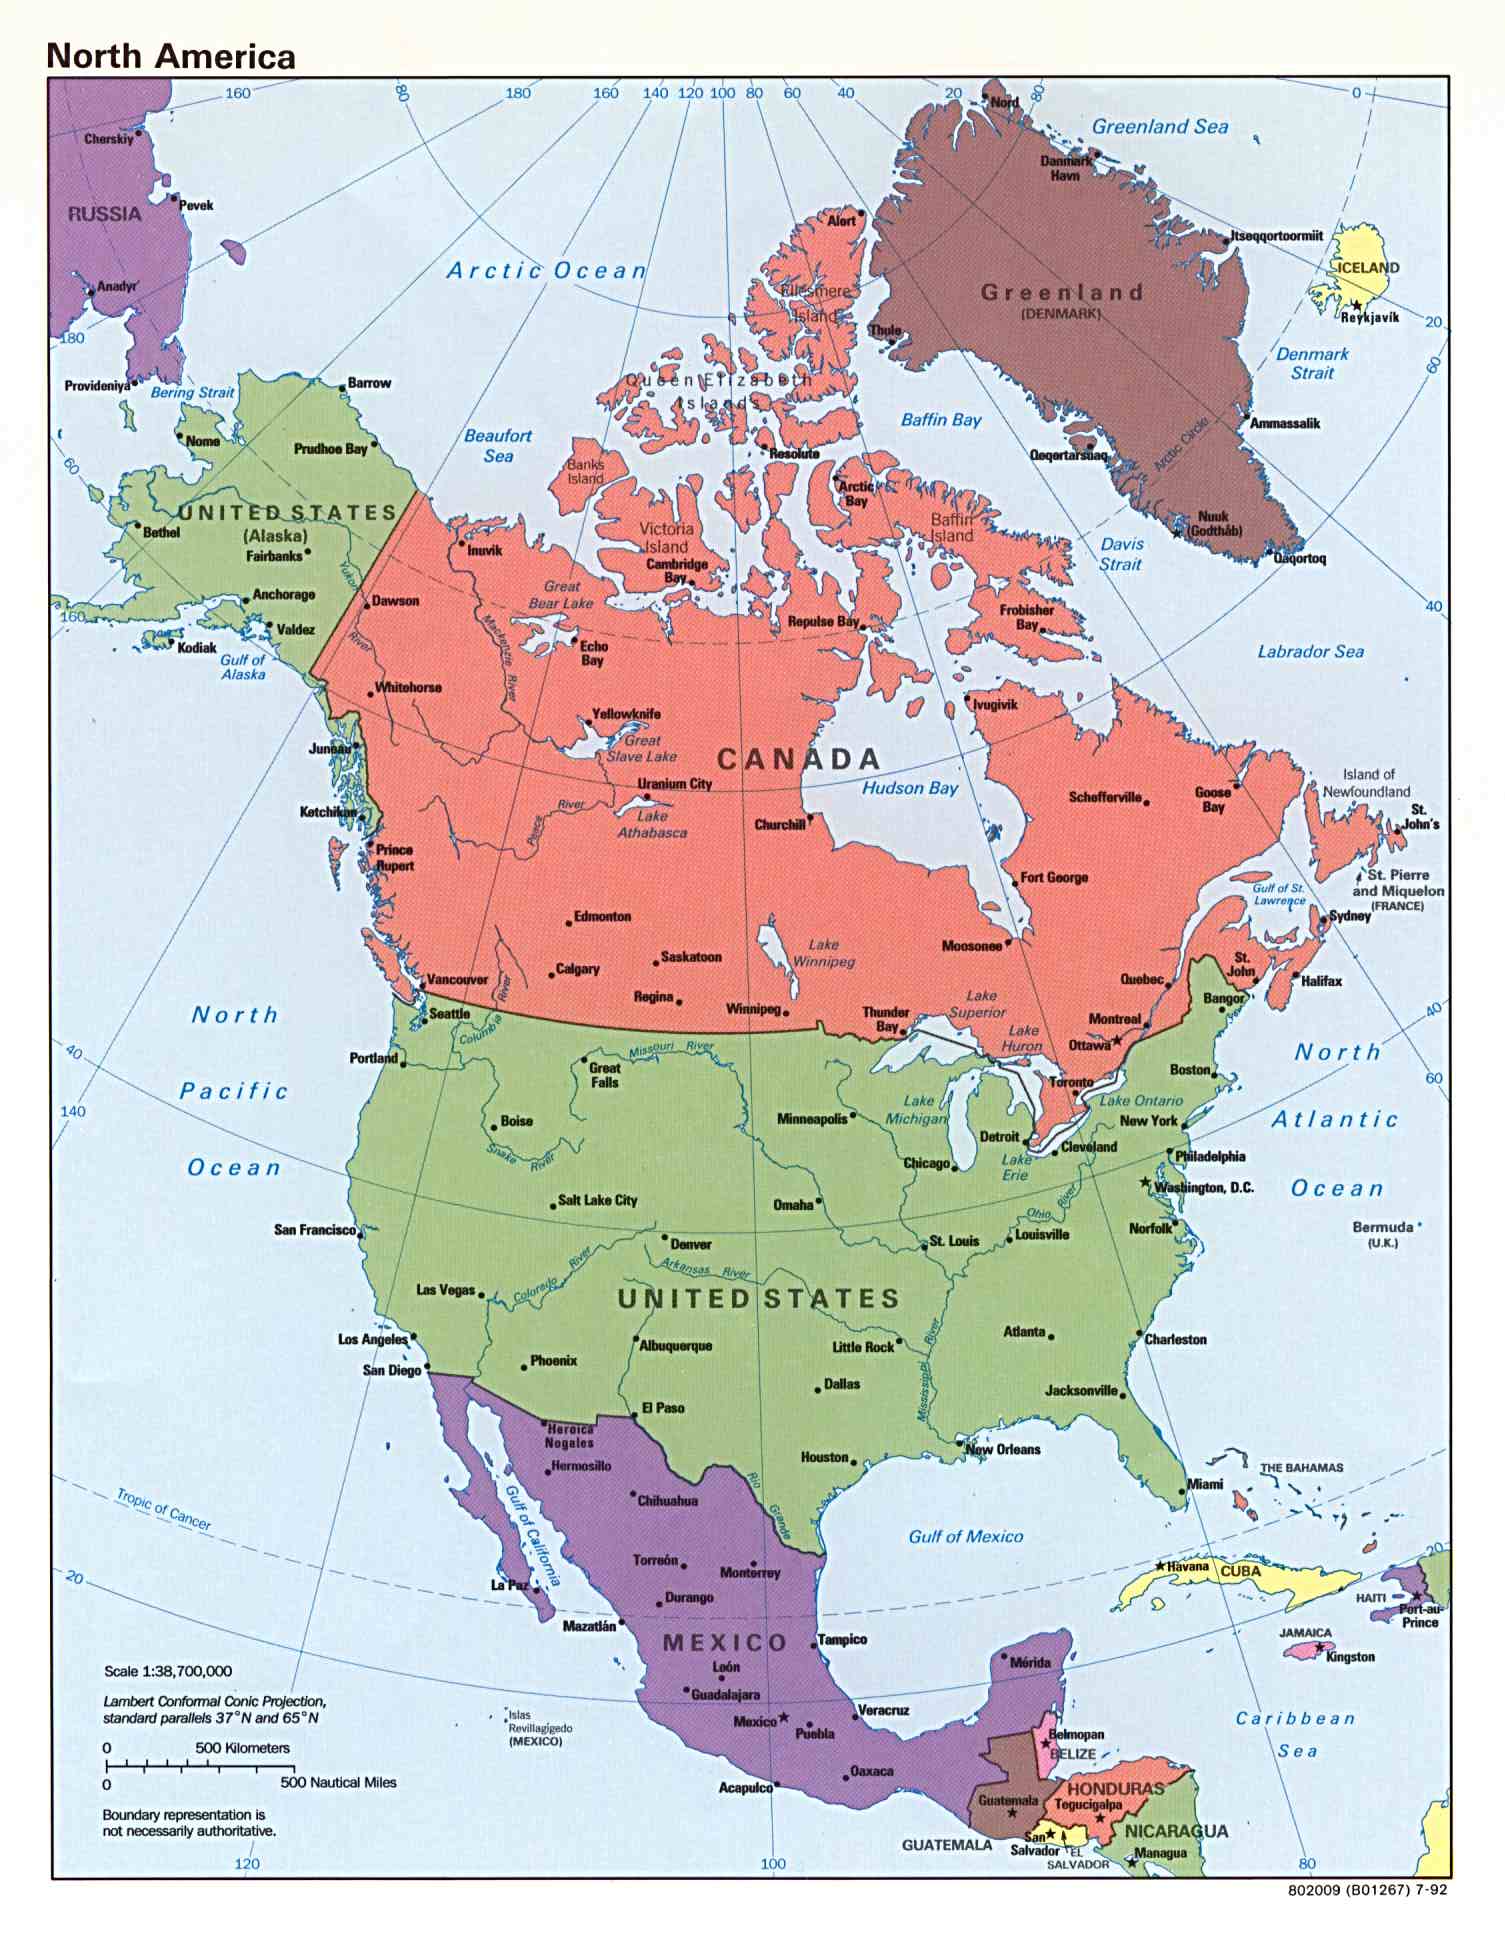 North America countries map